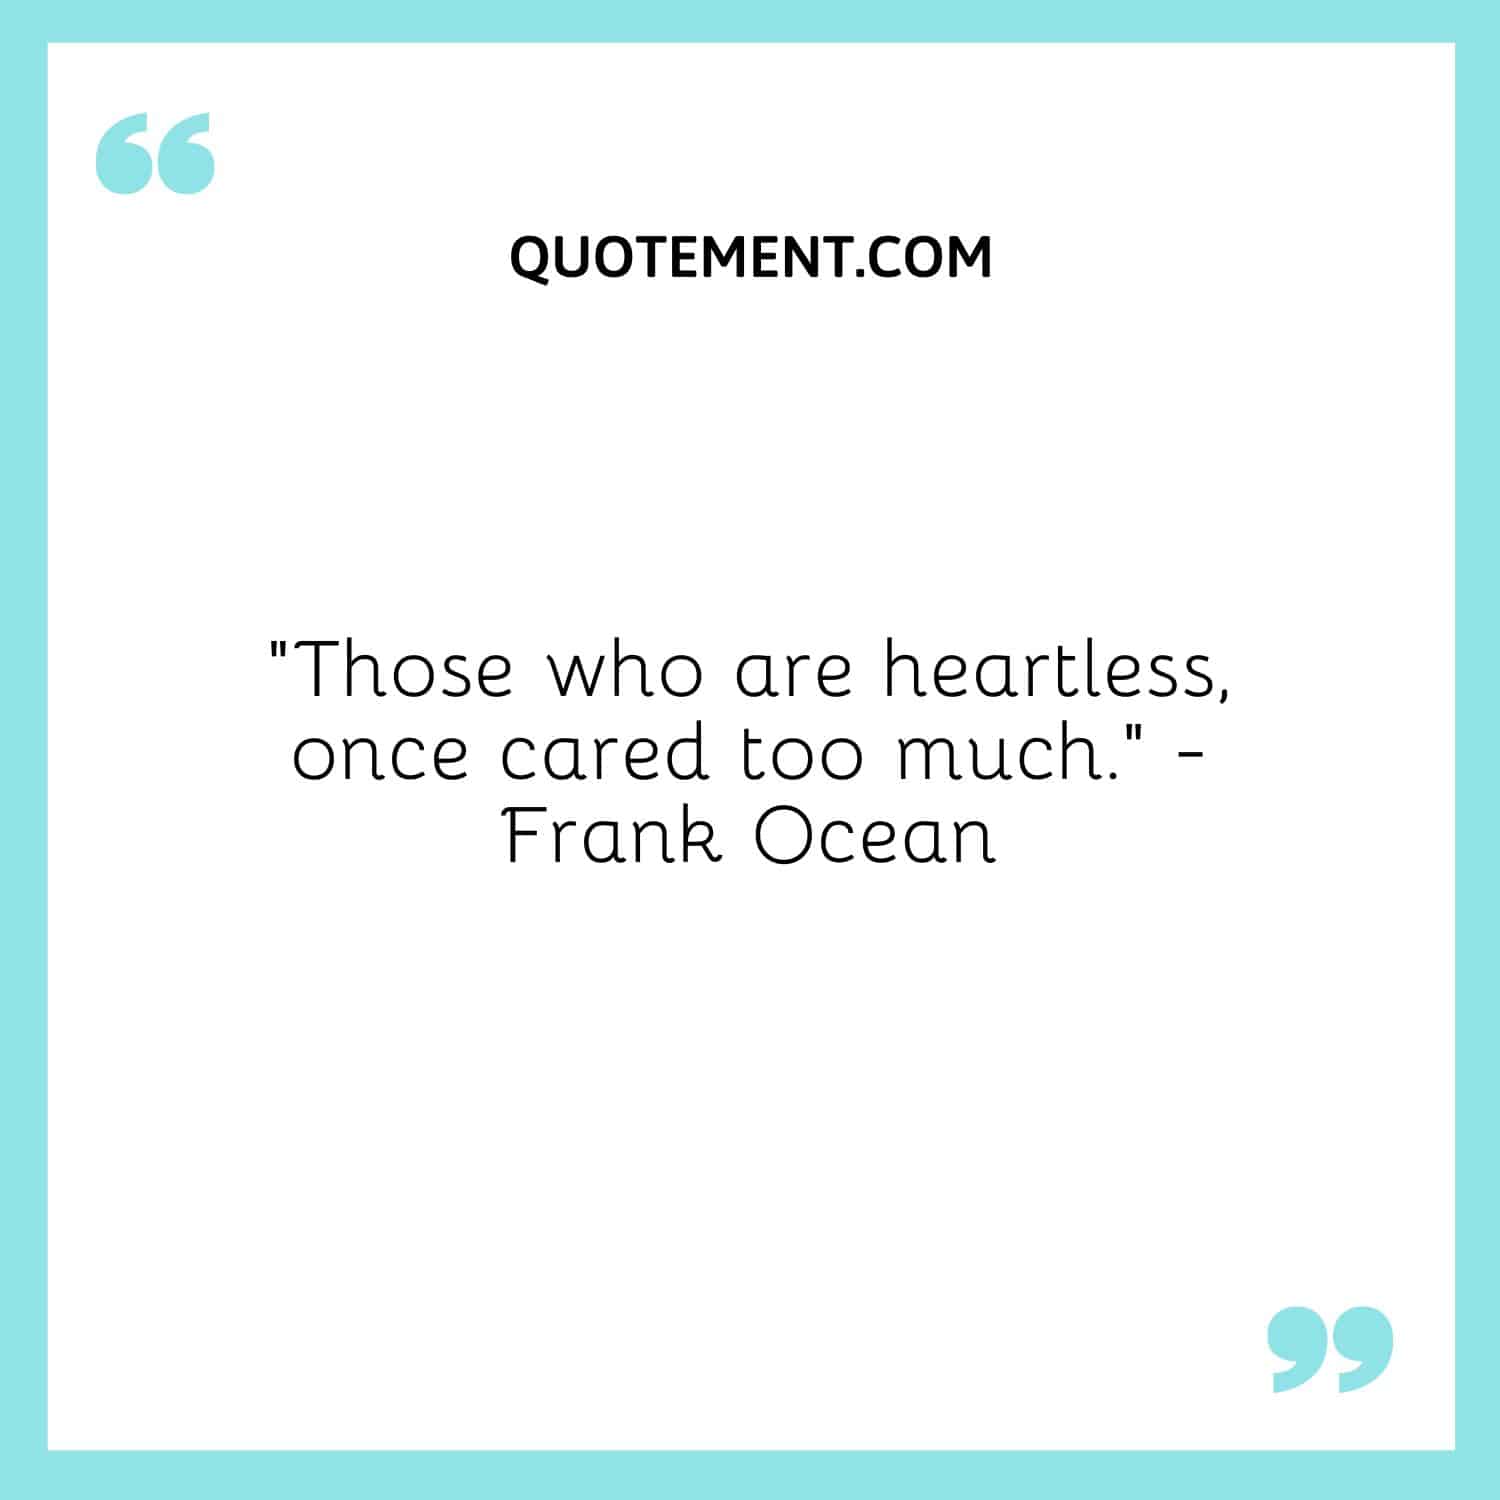 Those who are heartless, once cared too much